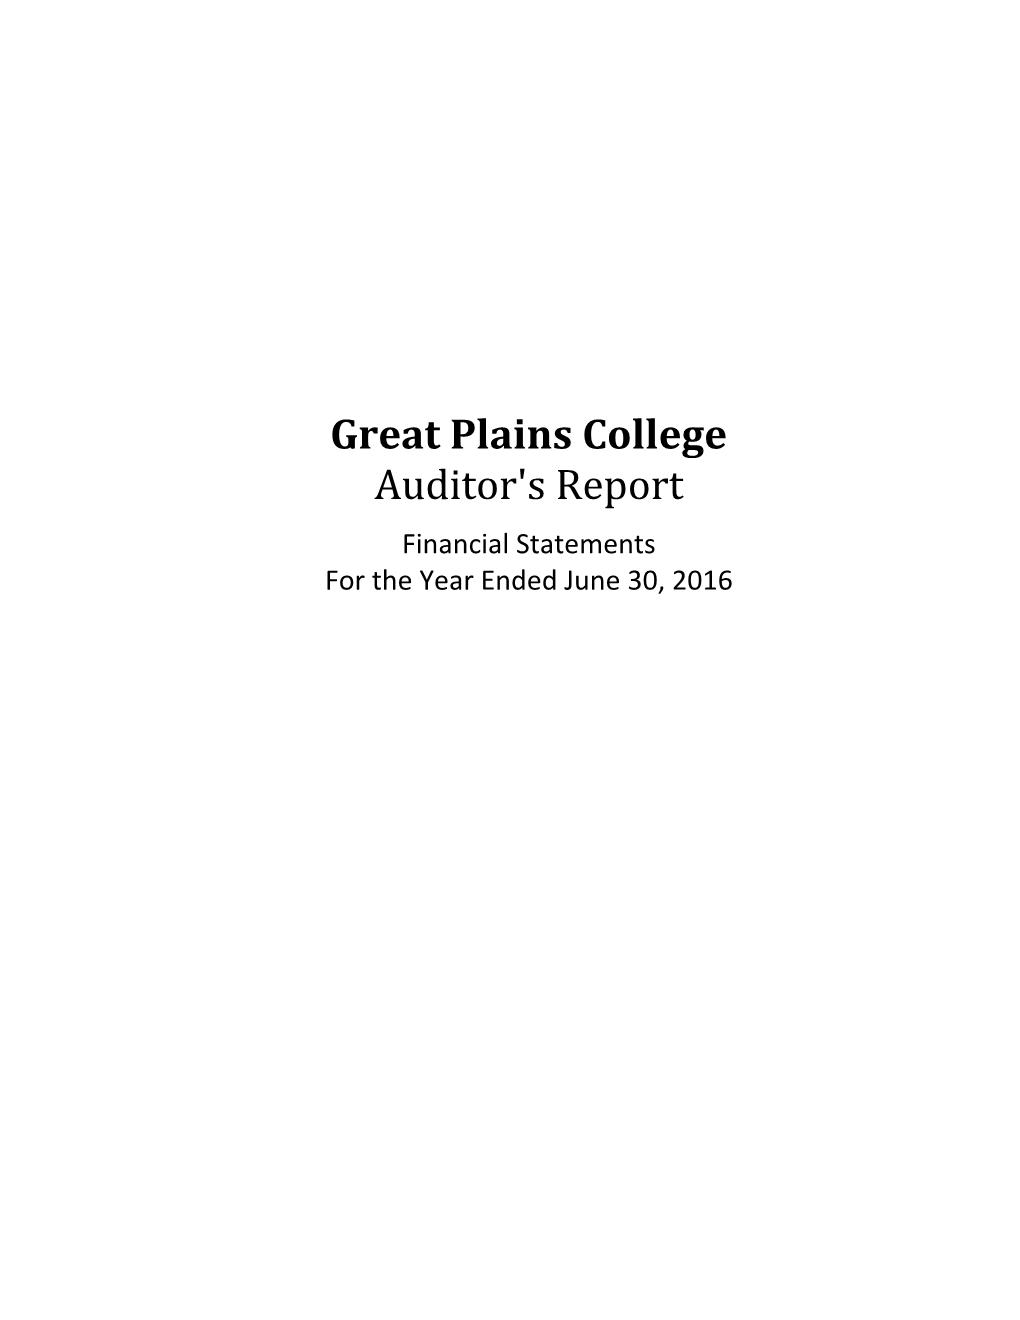 Great Plains College Auditor's Report Financial Statements for the Year Ended June 30, 2016